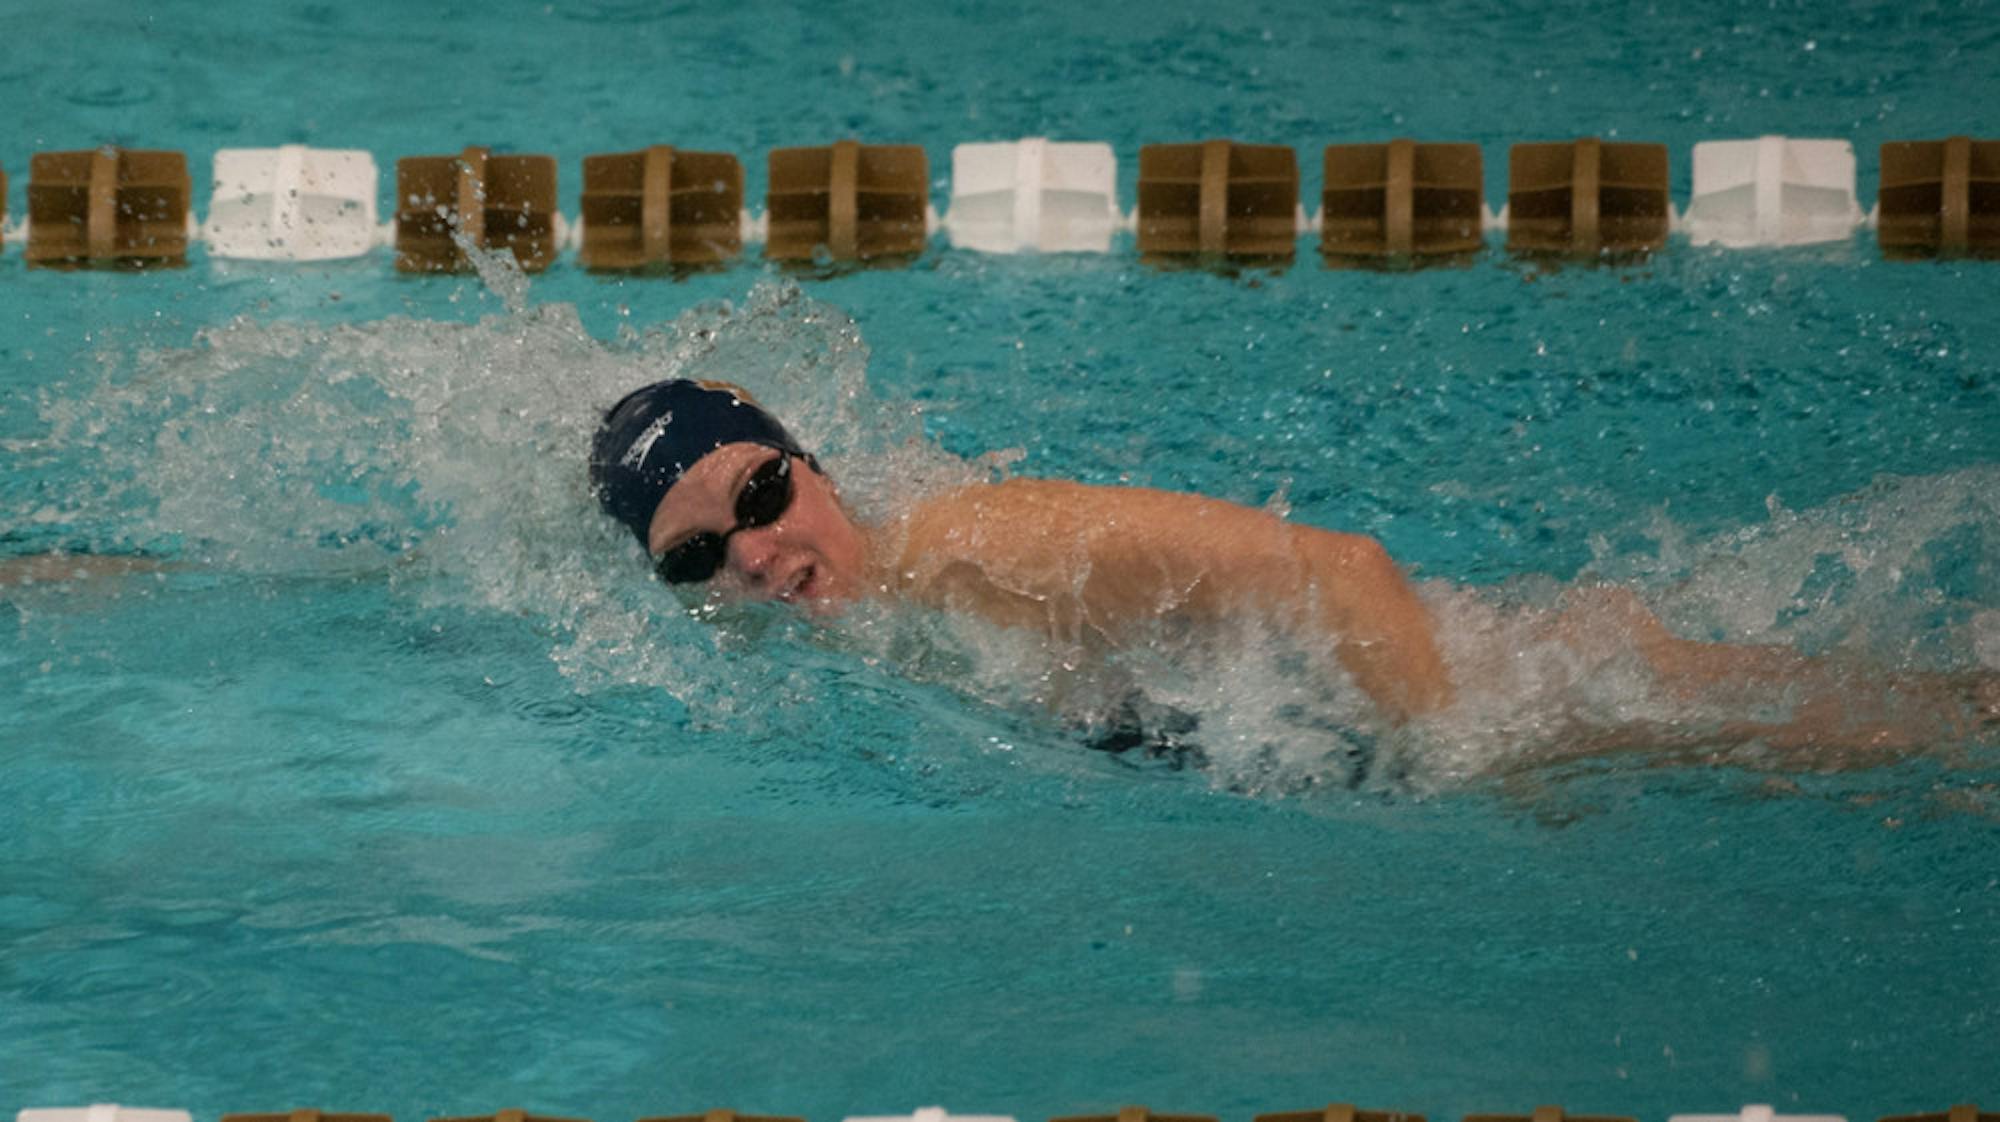 Irish sophomore Catherine Mulquin swims a freestyle event Nov. 15, 2013, against Valparaiso. Notre Dame won the meet 219-60.